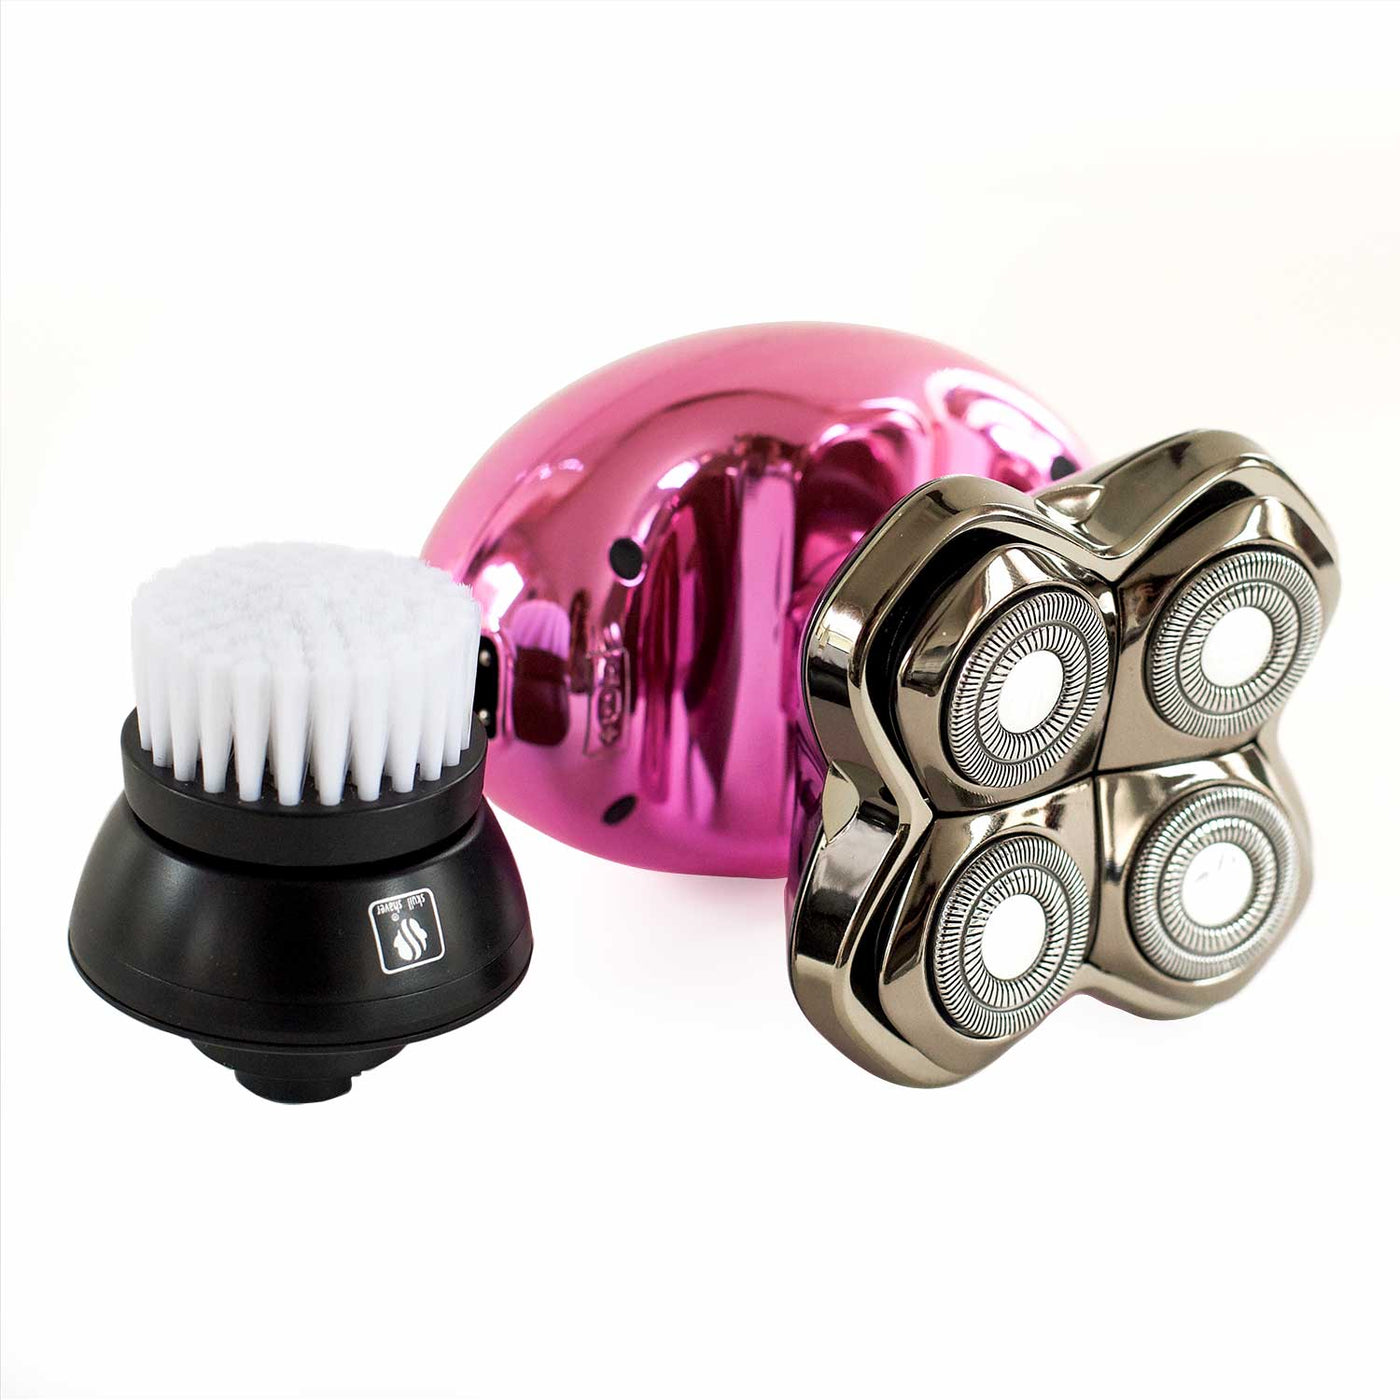 The Butterfly Kiss PRO is a cordless electric shaver that comes in three colors: pink, purple, and rose gold. The Butterfly Kiss PRO shaver comes with a 4 head Carver PRO blade that contours to your curves while shaving your legs, body, or head, and an exfoliating brush attachment.